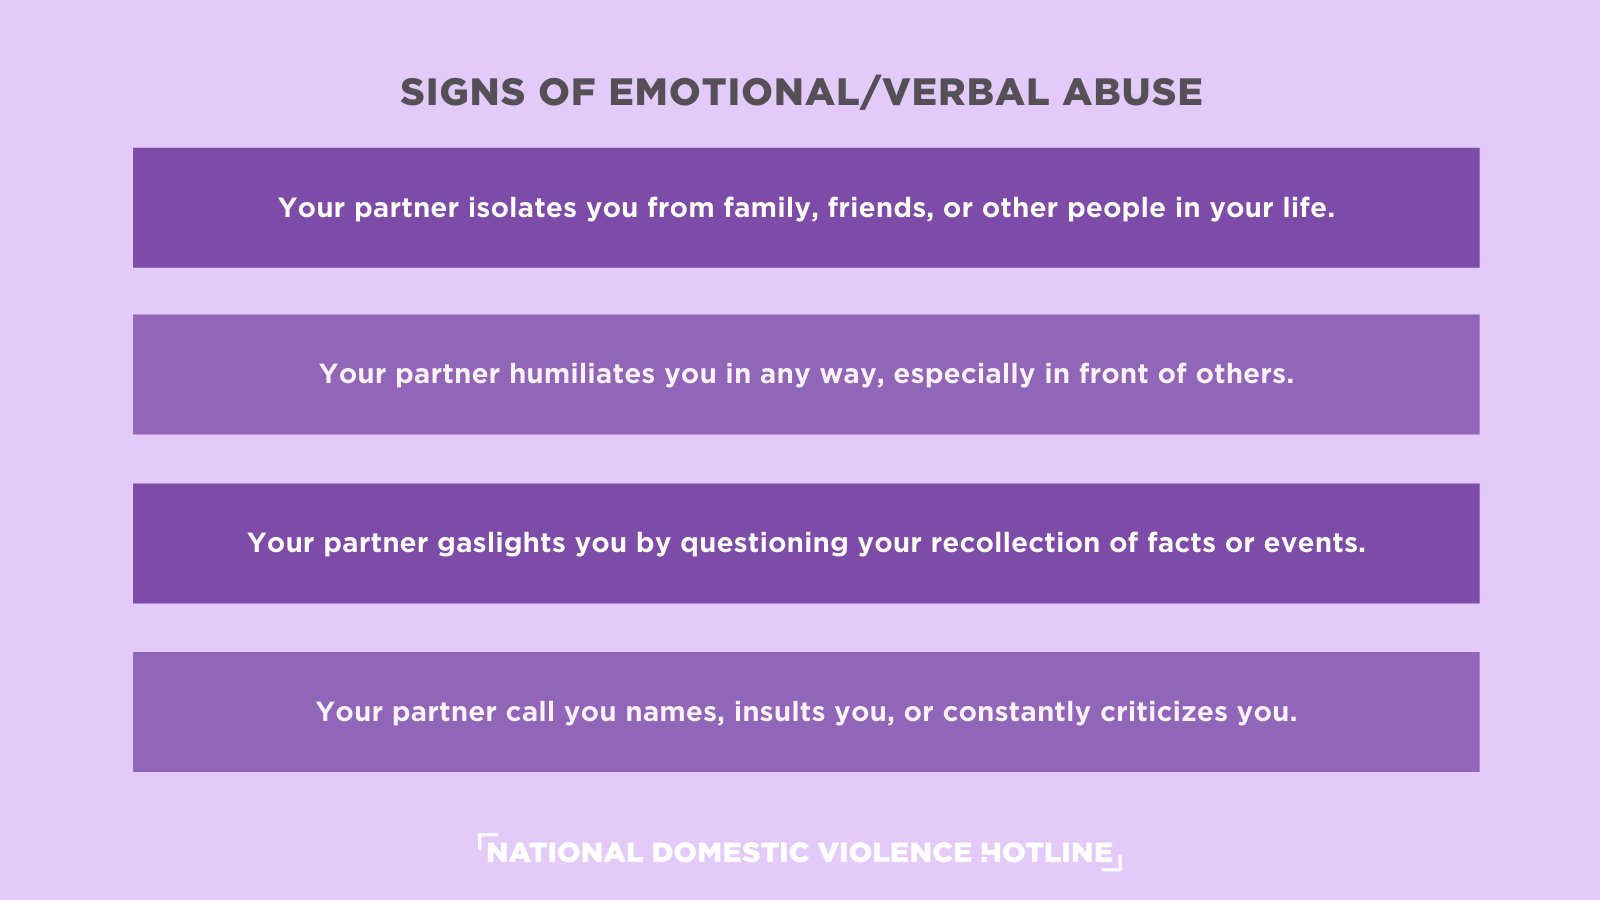 National Domestic Violence Hotline on X: "Emotional/verbal abuse is  behavior that isn't physical, which may include verbal aggression,  intimidation, manipulation, and humiliation, which most often unfolds as a  pattern of behavior over